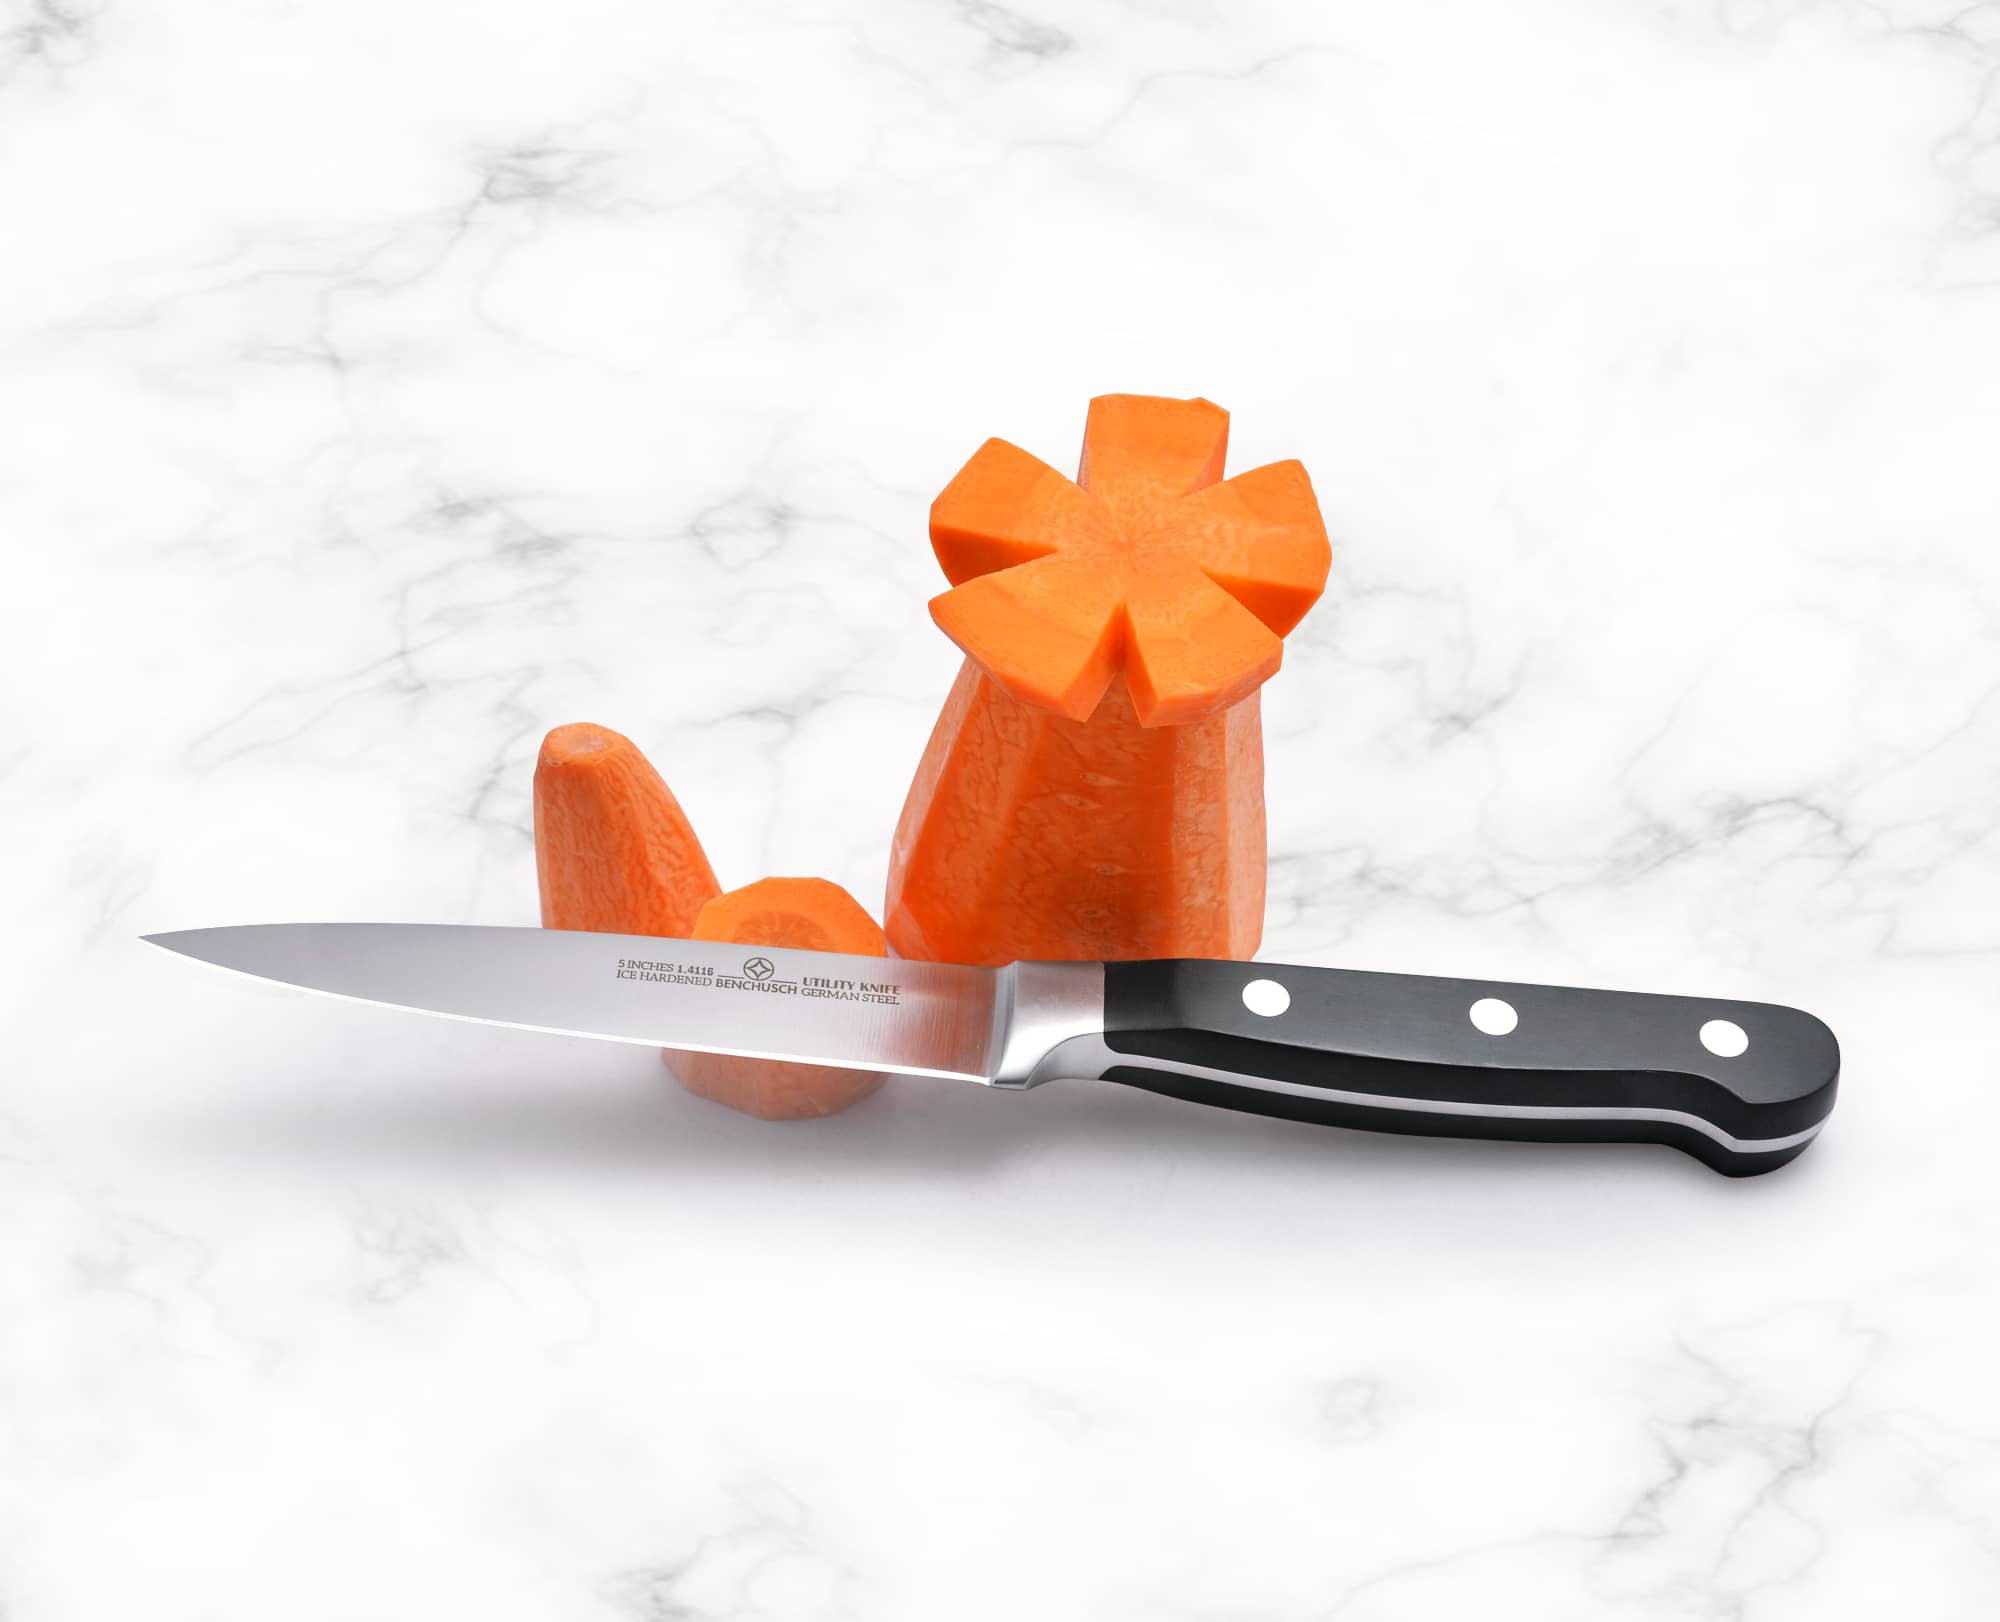 Benchusch Classic 5-inch Utility Knife with cutted carrot on the marble background